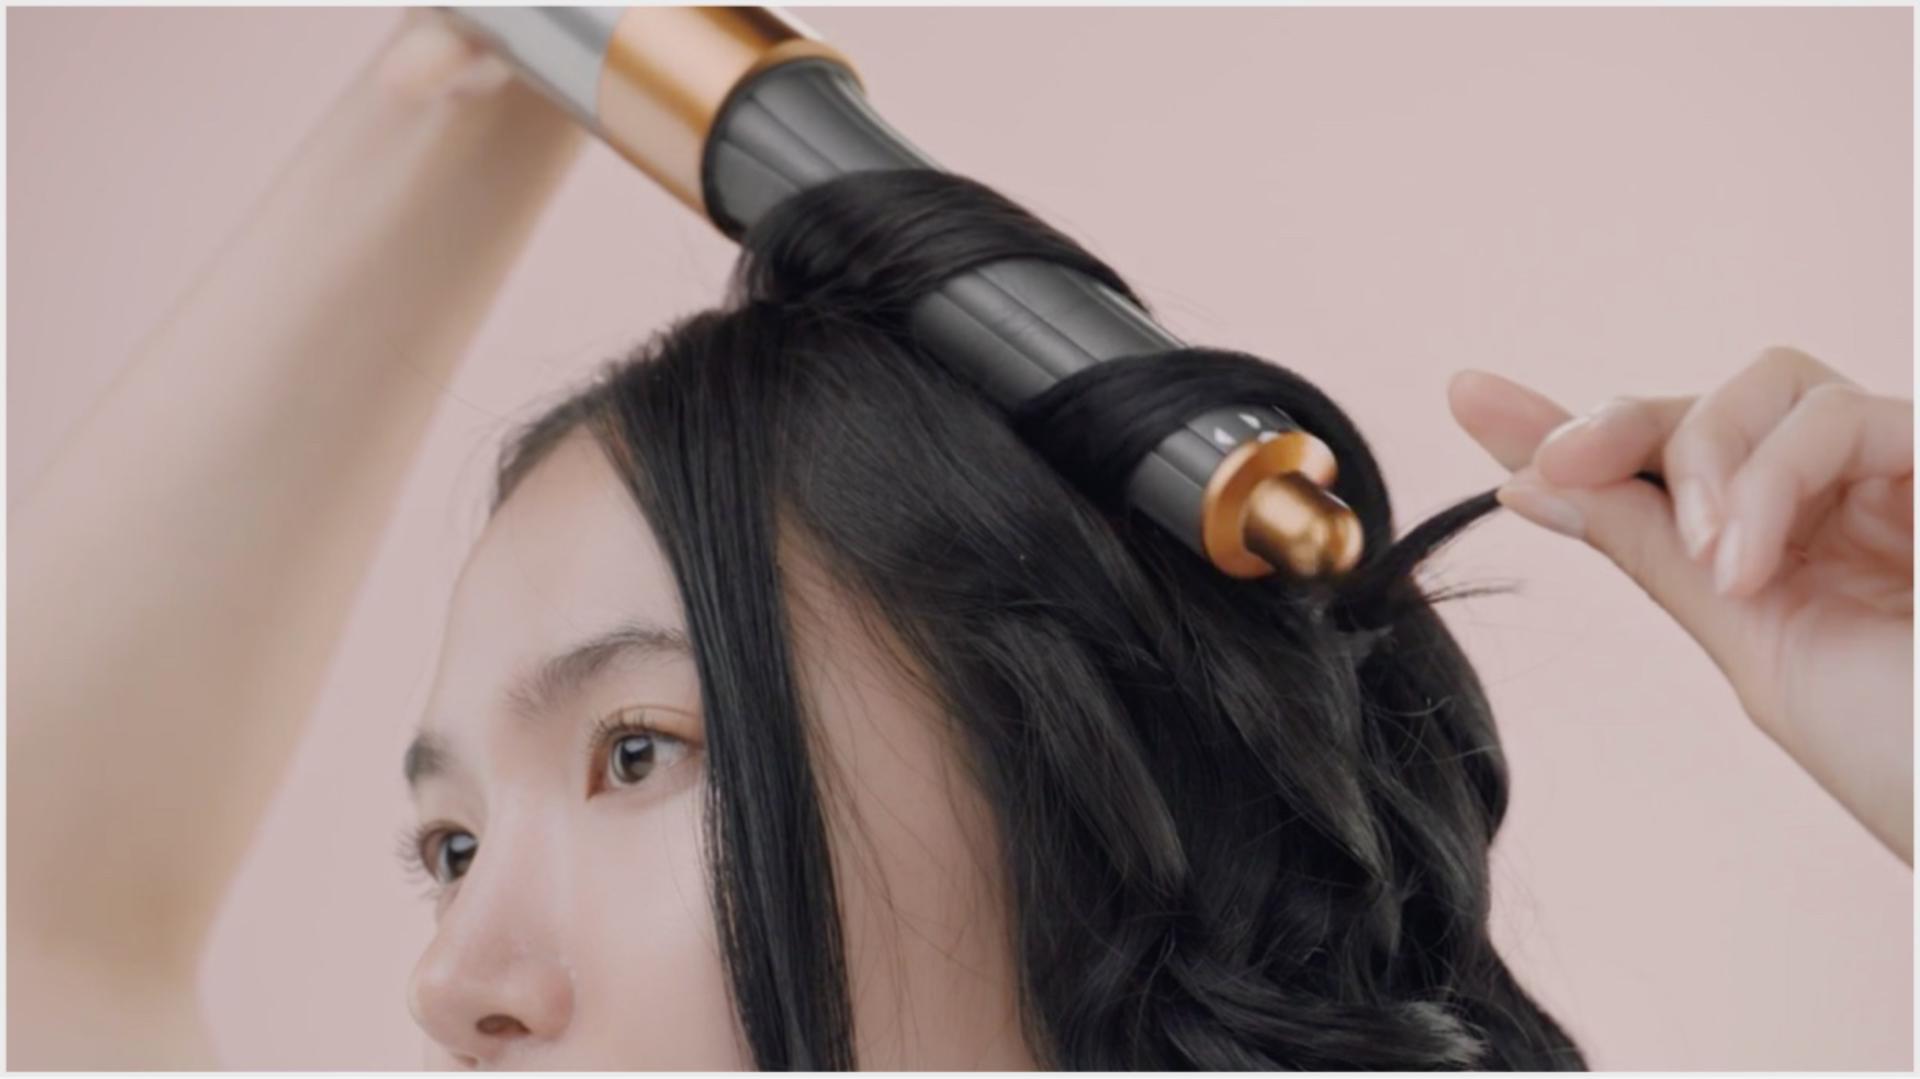 Woman styling hair with Dyson hair care technology.